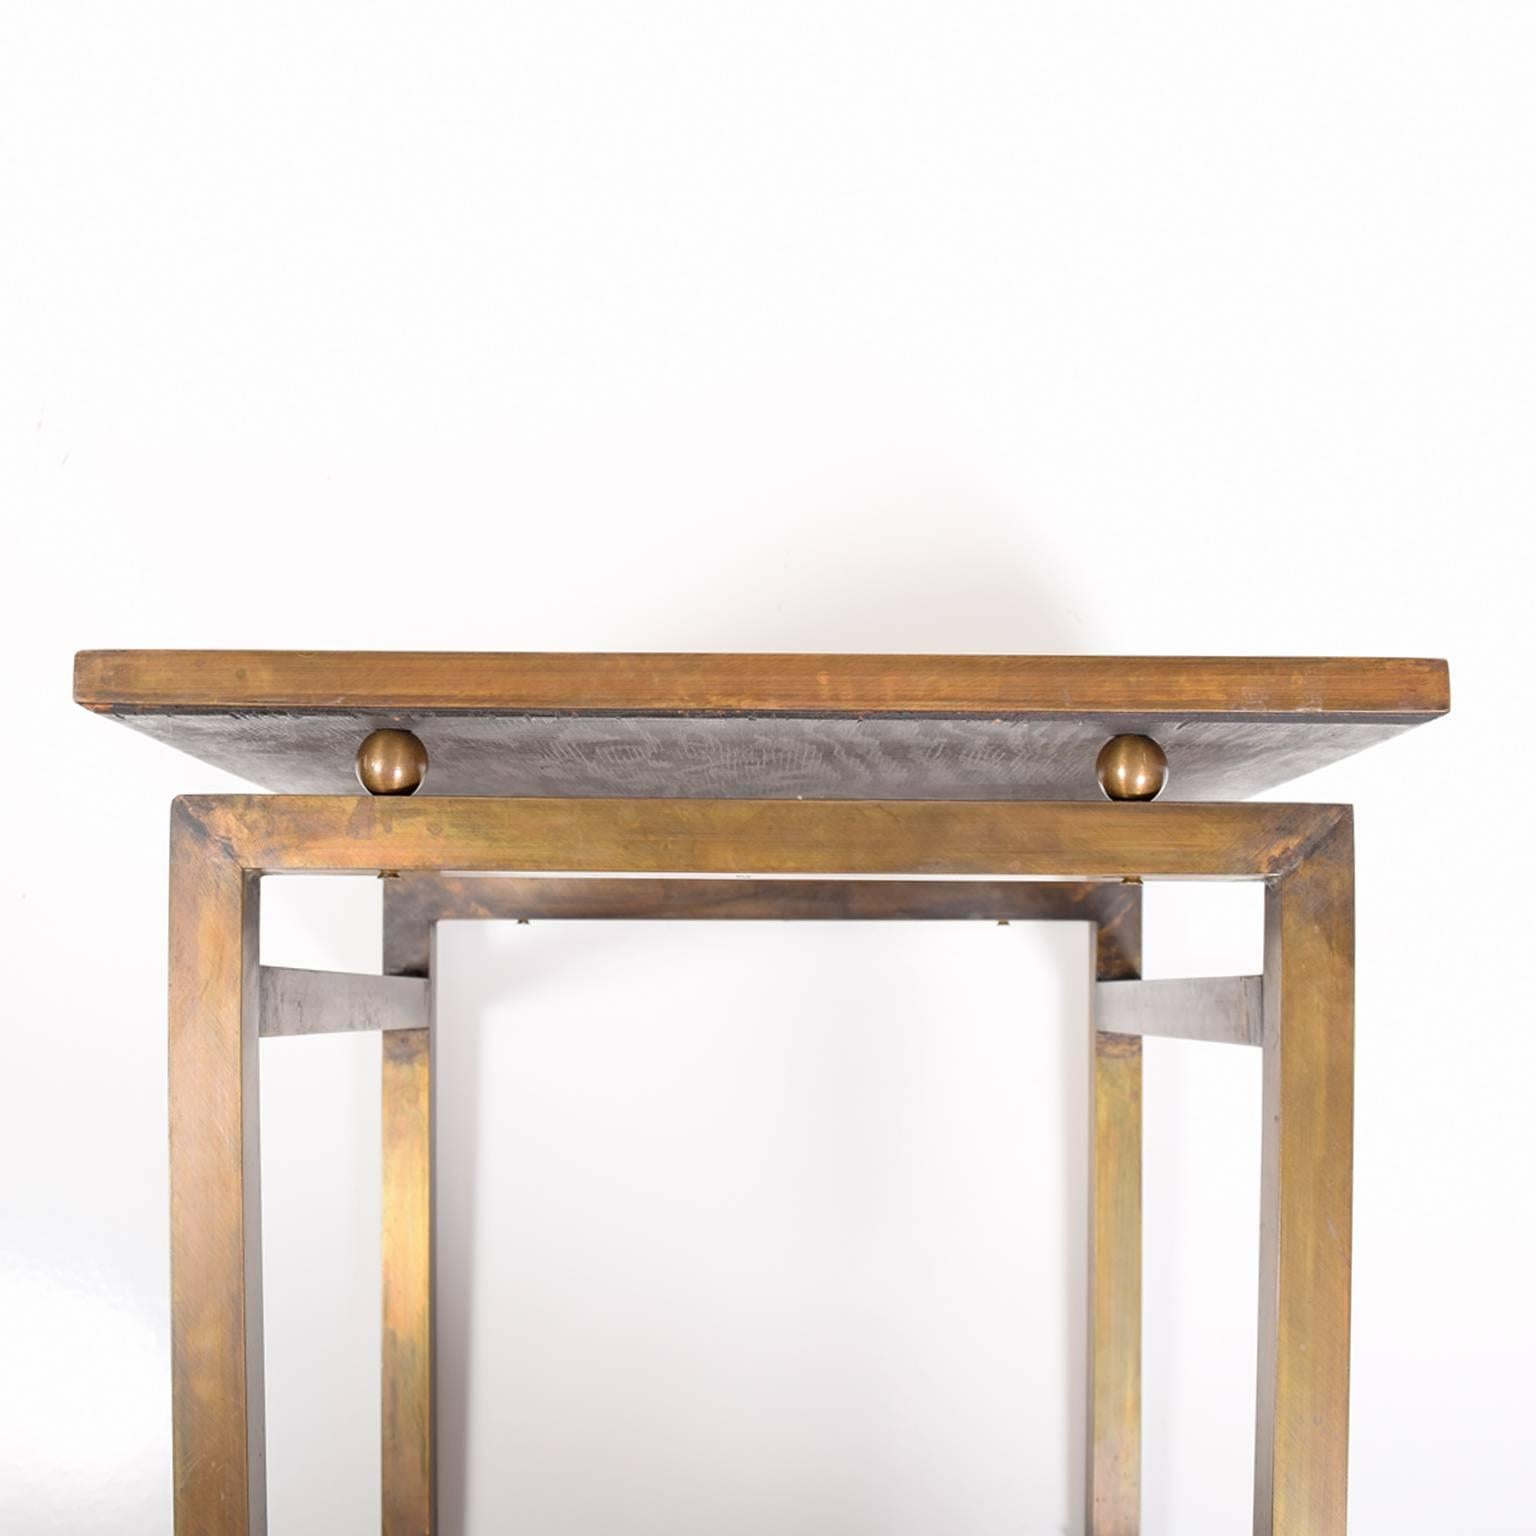 Original etched and patinated bronze side table with pewter overlay and polychrome details. Signed on top of table.